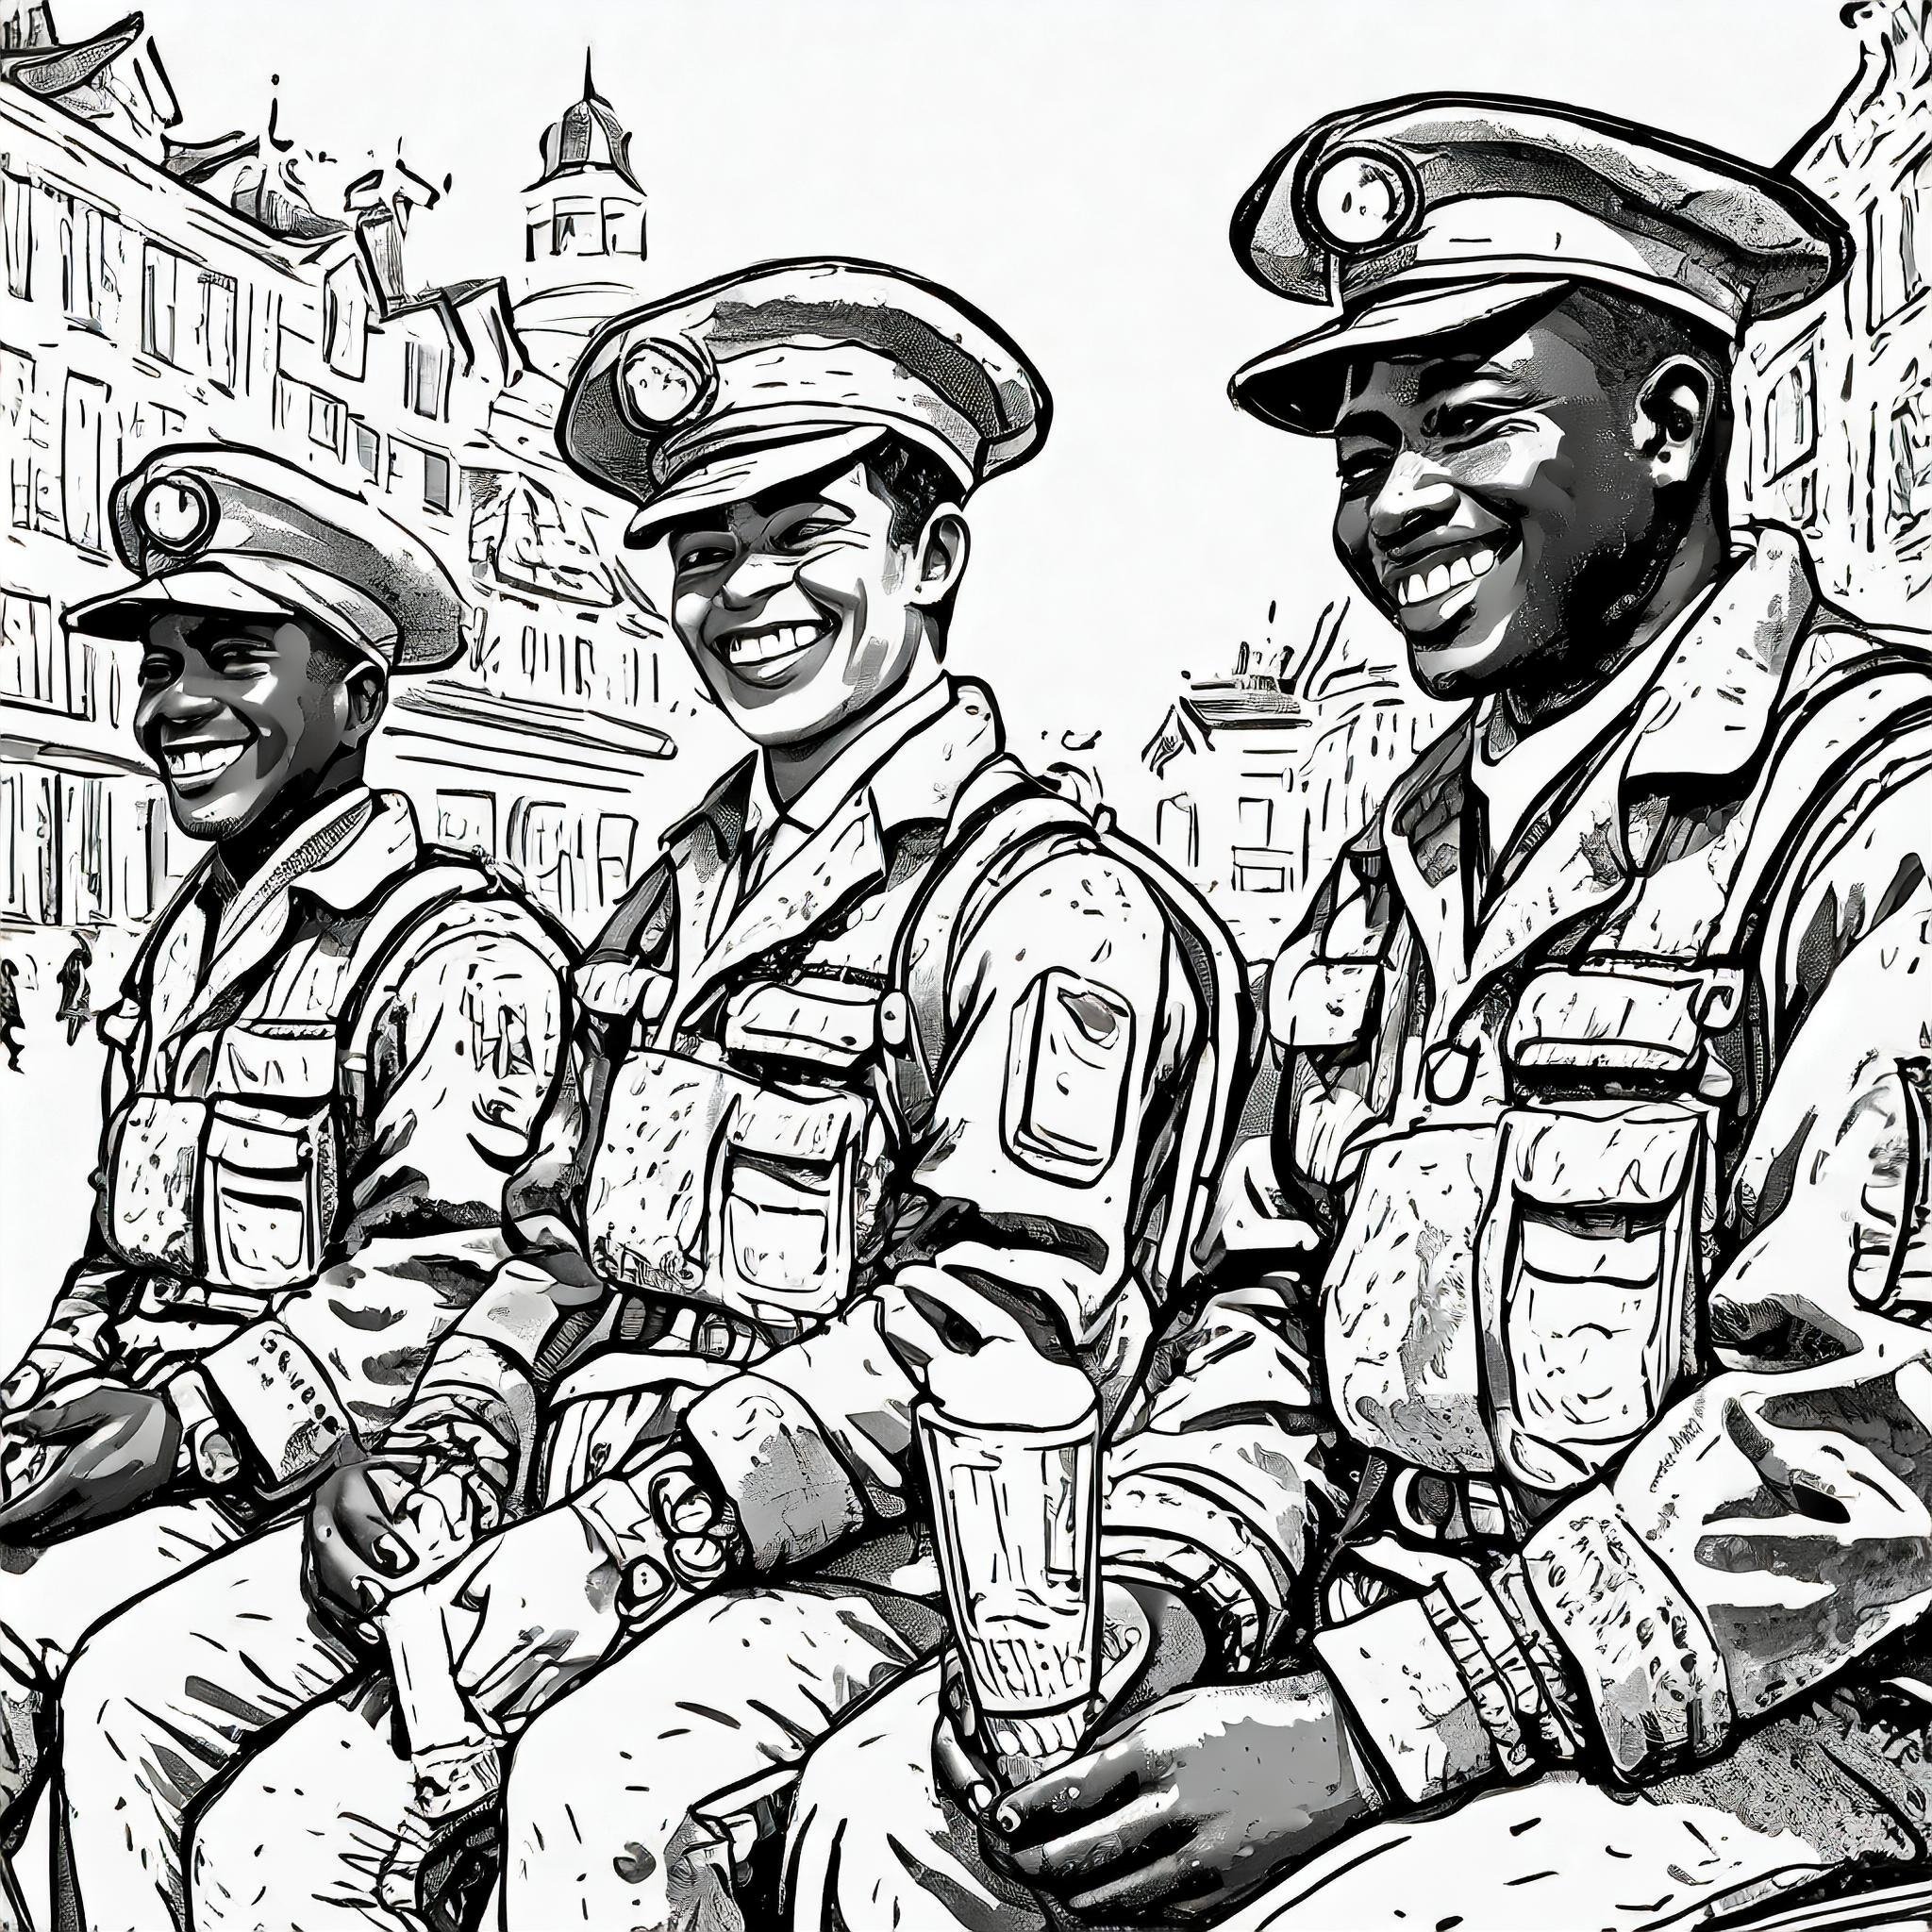 Black people in the uniform of the U.S. Army. They casually squatted on their jeeps, laughed with dazzling white teethes, in the year 1945 in a german city